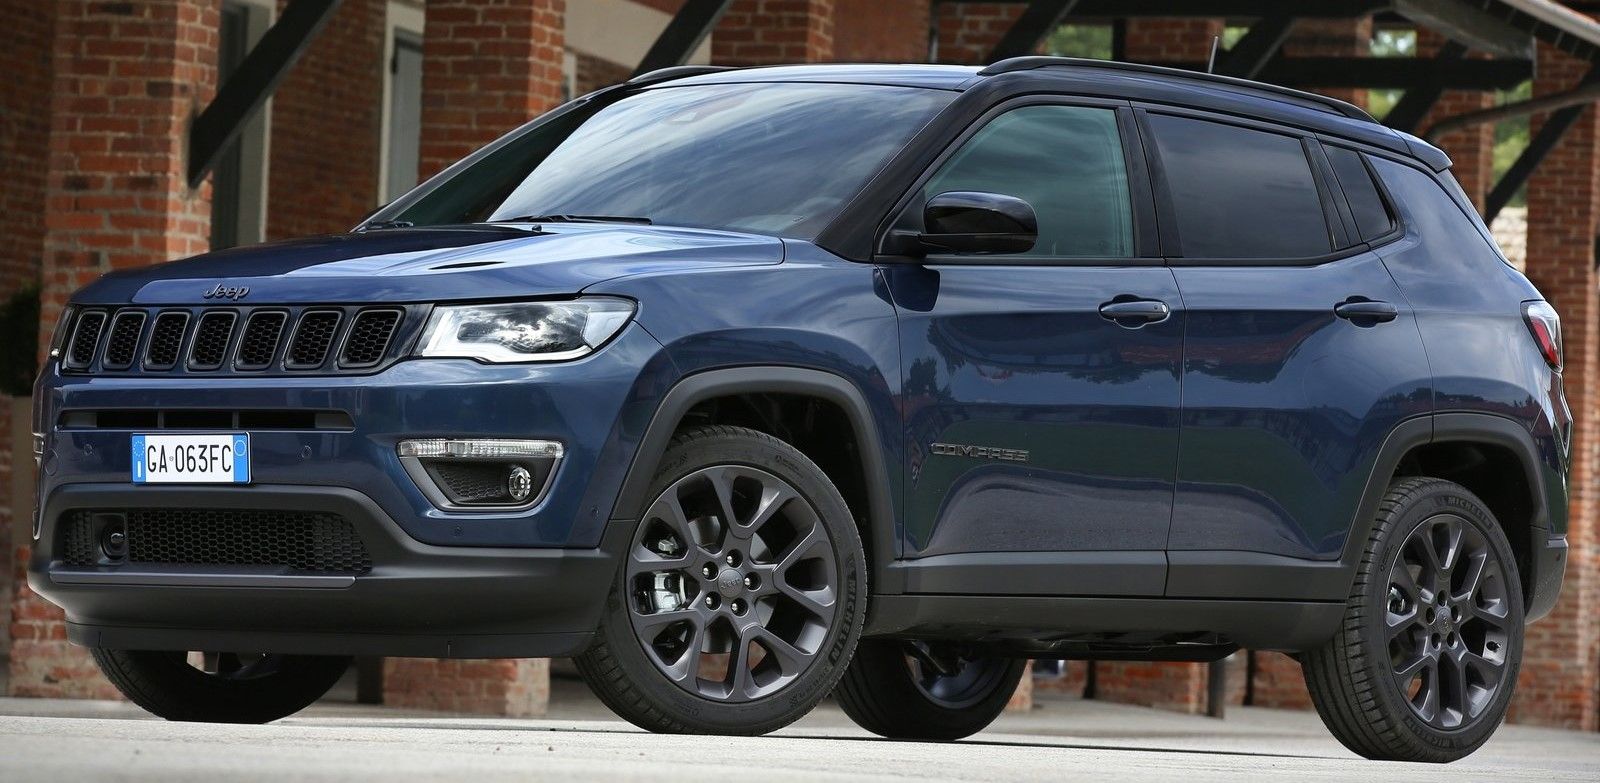 The side view of the 2020 Jeep Compass.